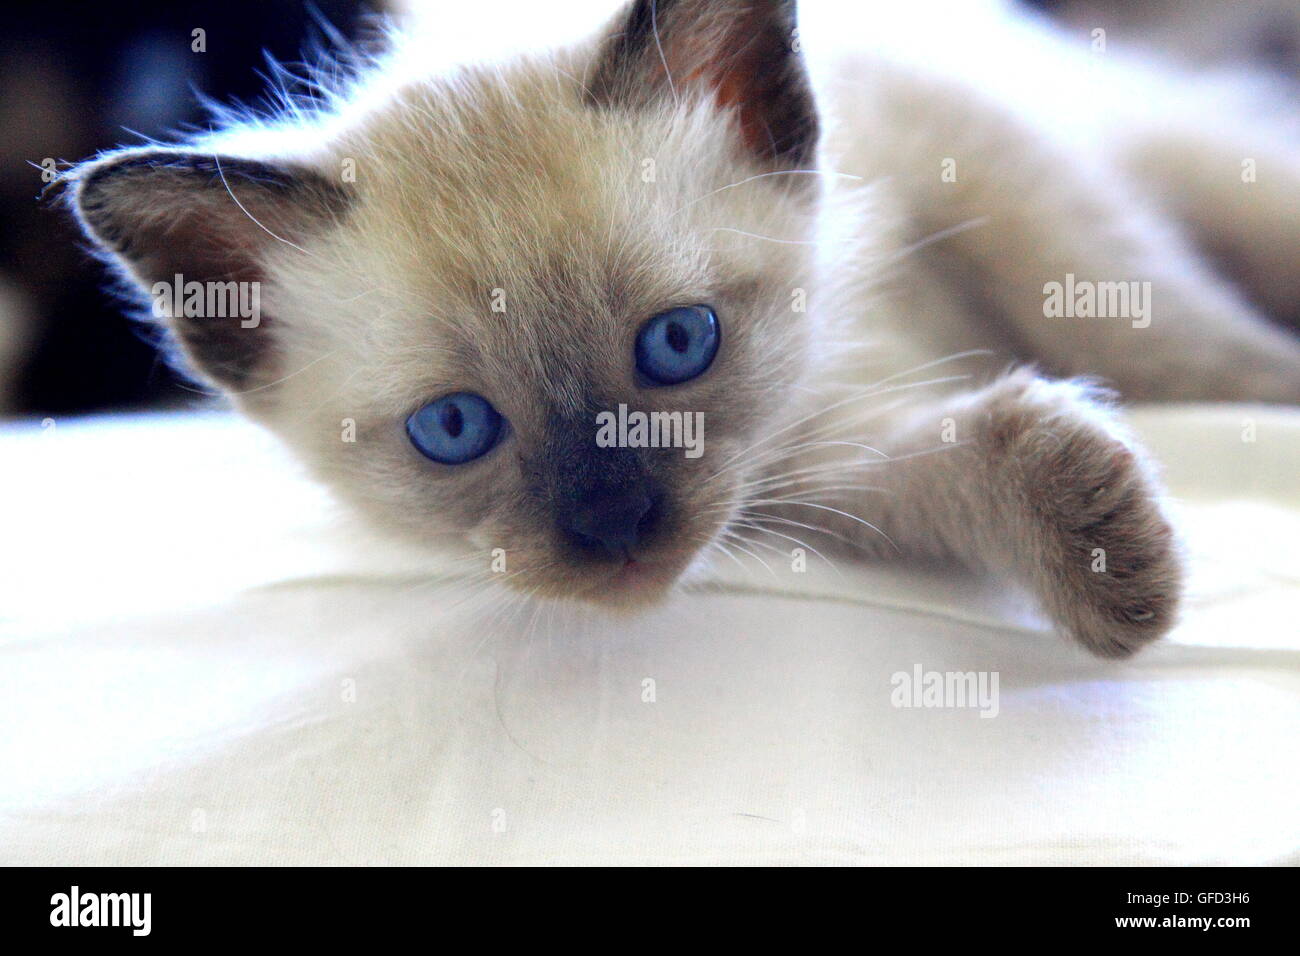 siamese kitten is having a rest on bed Stock Photo